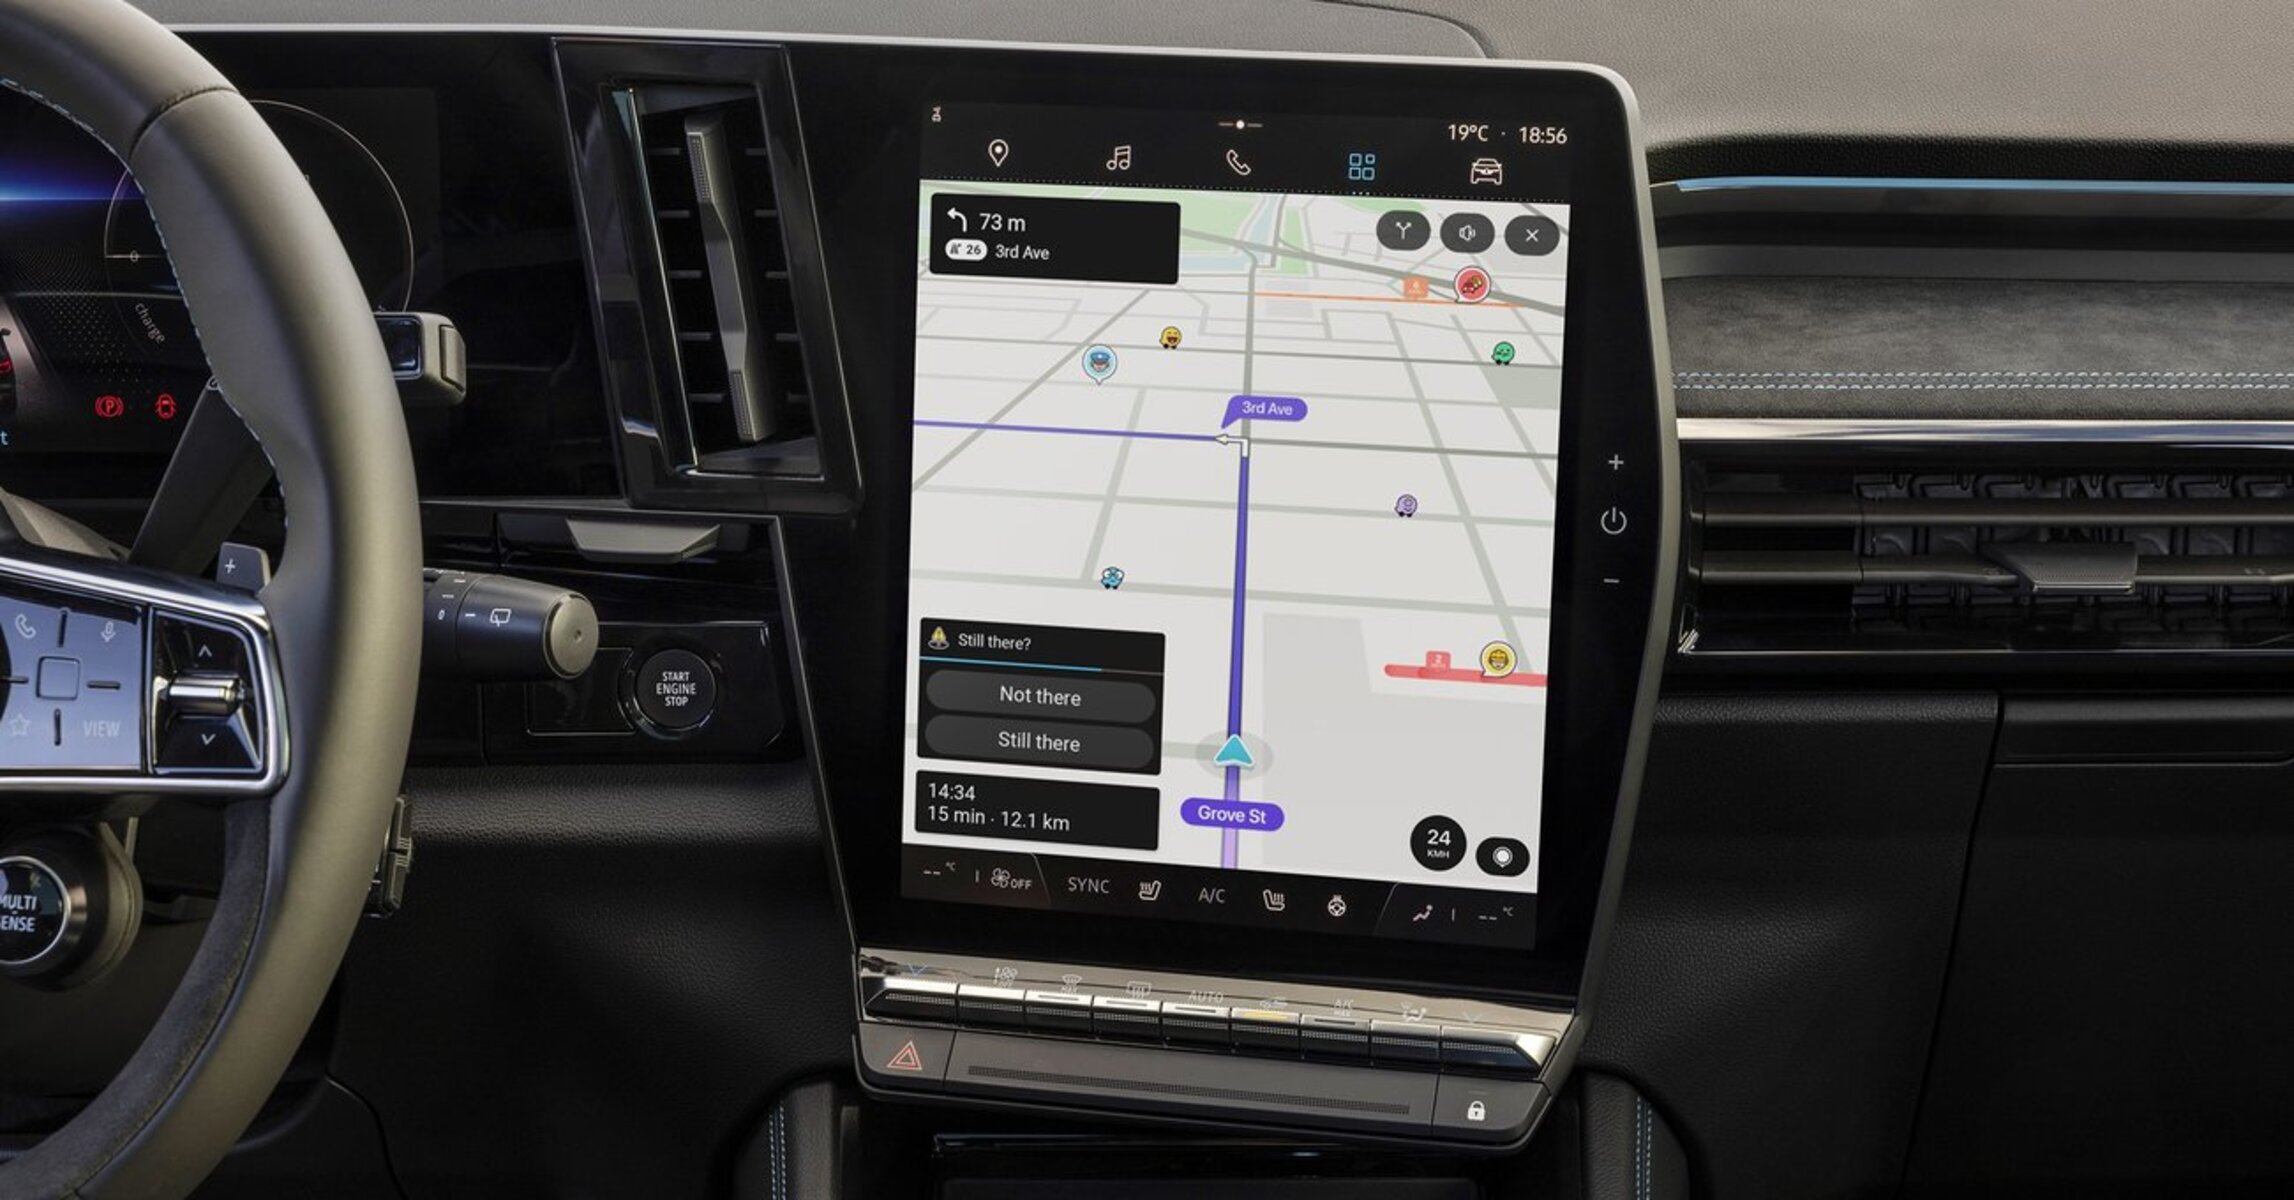 waze-now-comes-pre-installed-in-select-vehicles-with-a-big-bold-display